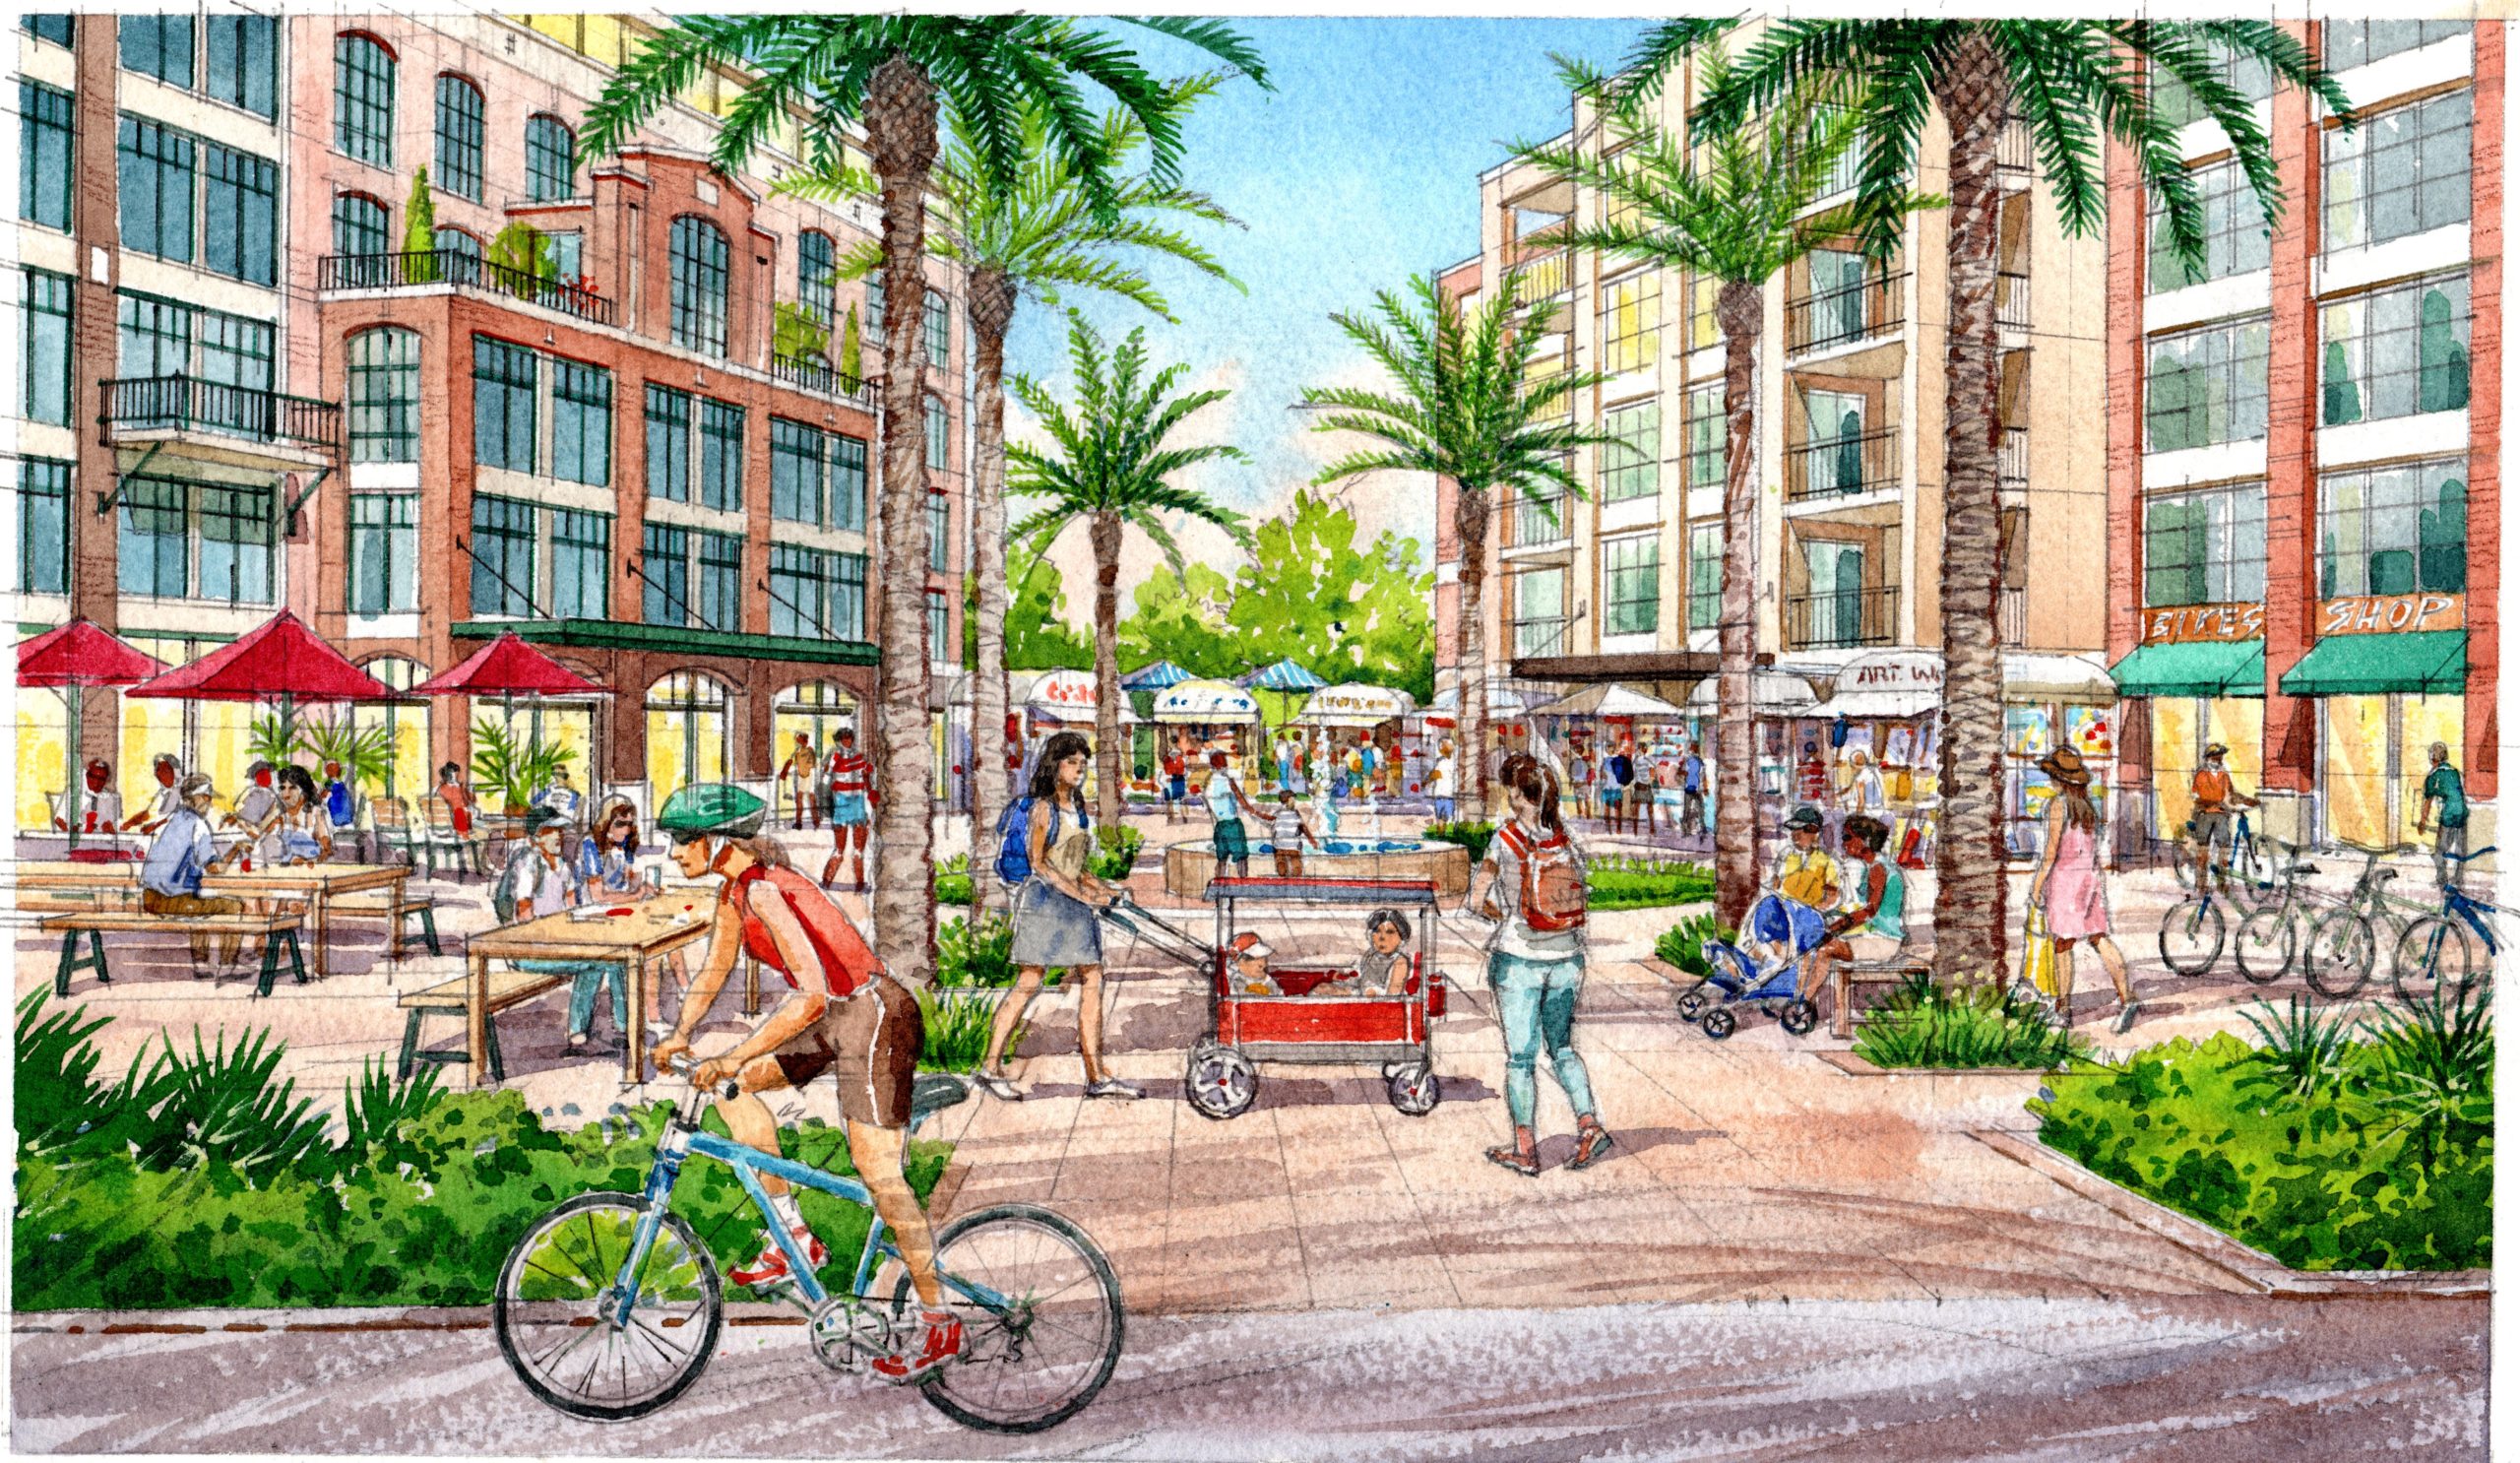 Pinellas Trail Rendering used to gain community support for iMix in St. Pete